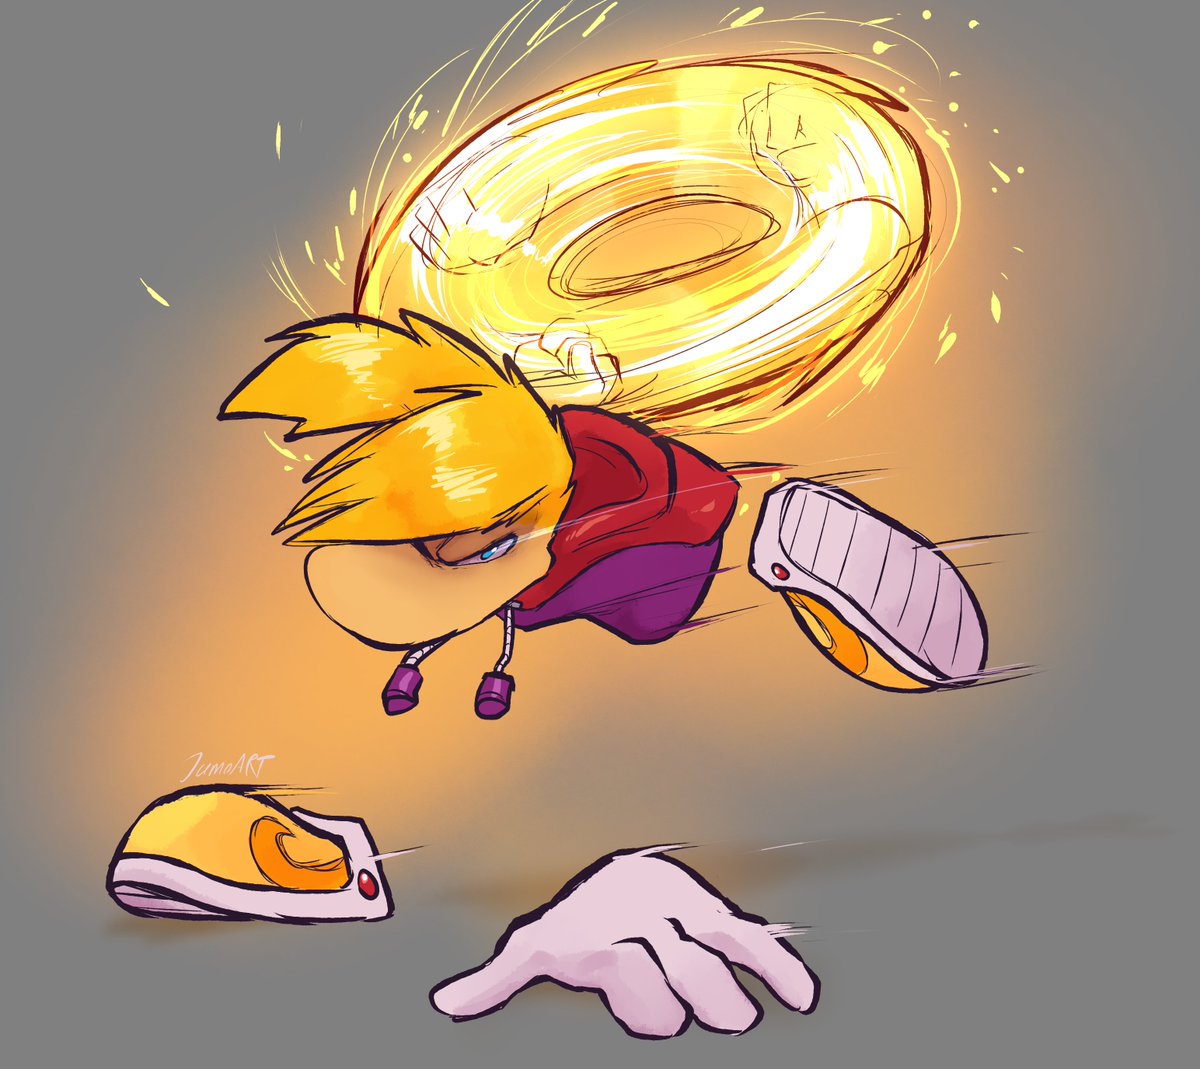 「Here's a "Angry pissed-off Rayman" post 」|Jamo🍜のイラスト